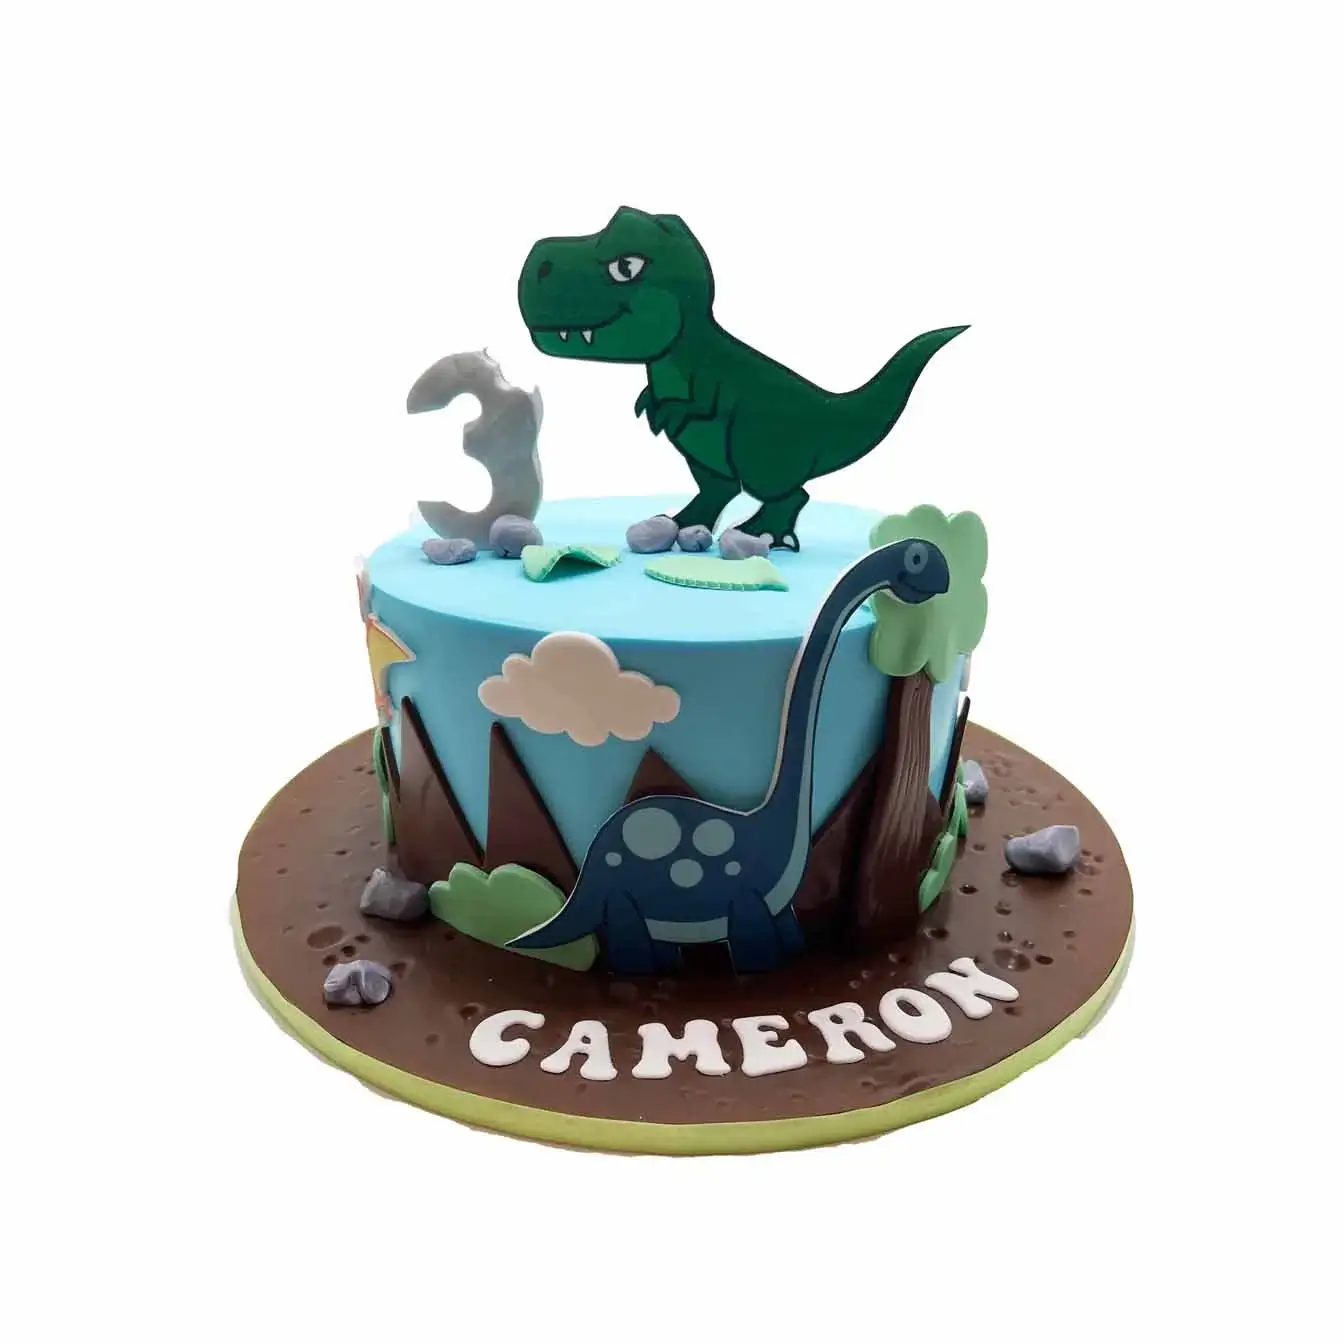 Dino Adventure Edible Image Cake - A cake with a captivating edible image design featuring realistic and vibrant dinosaurs, a delightful centerpiece for dinosaur-themed celebrations.